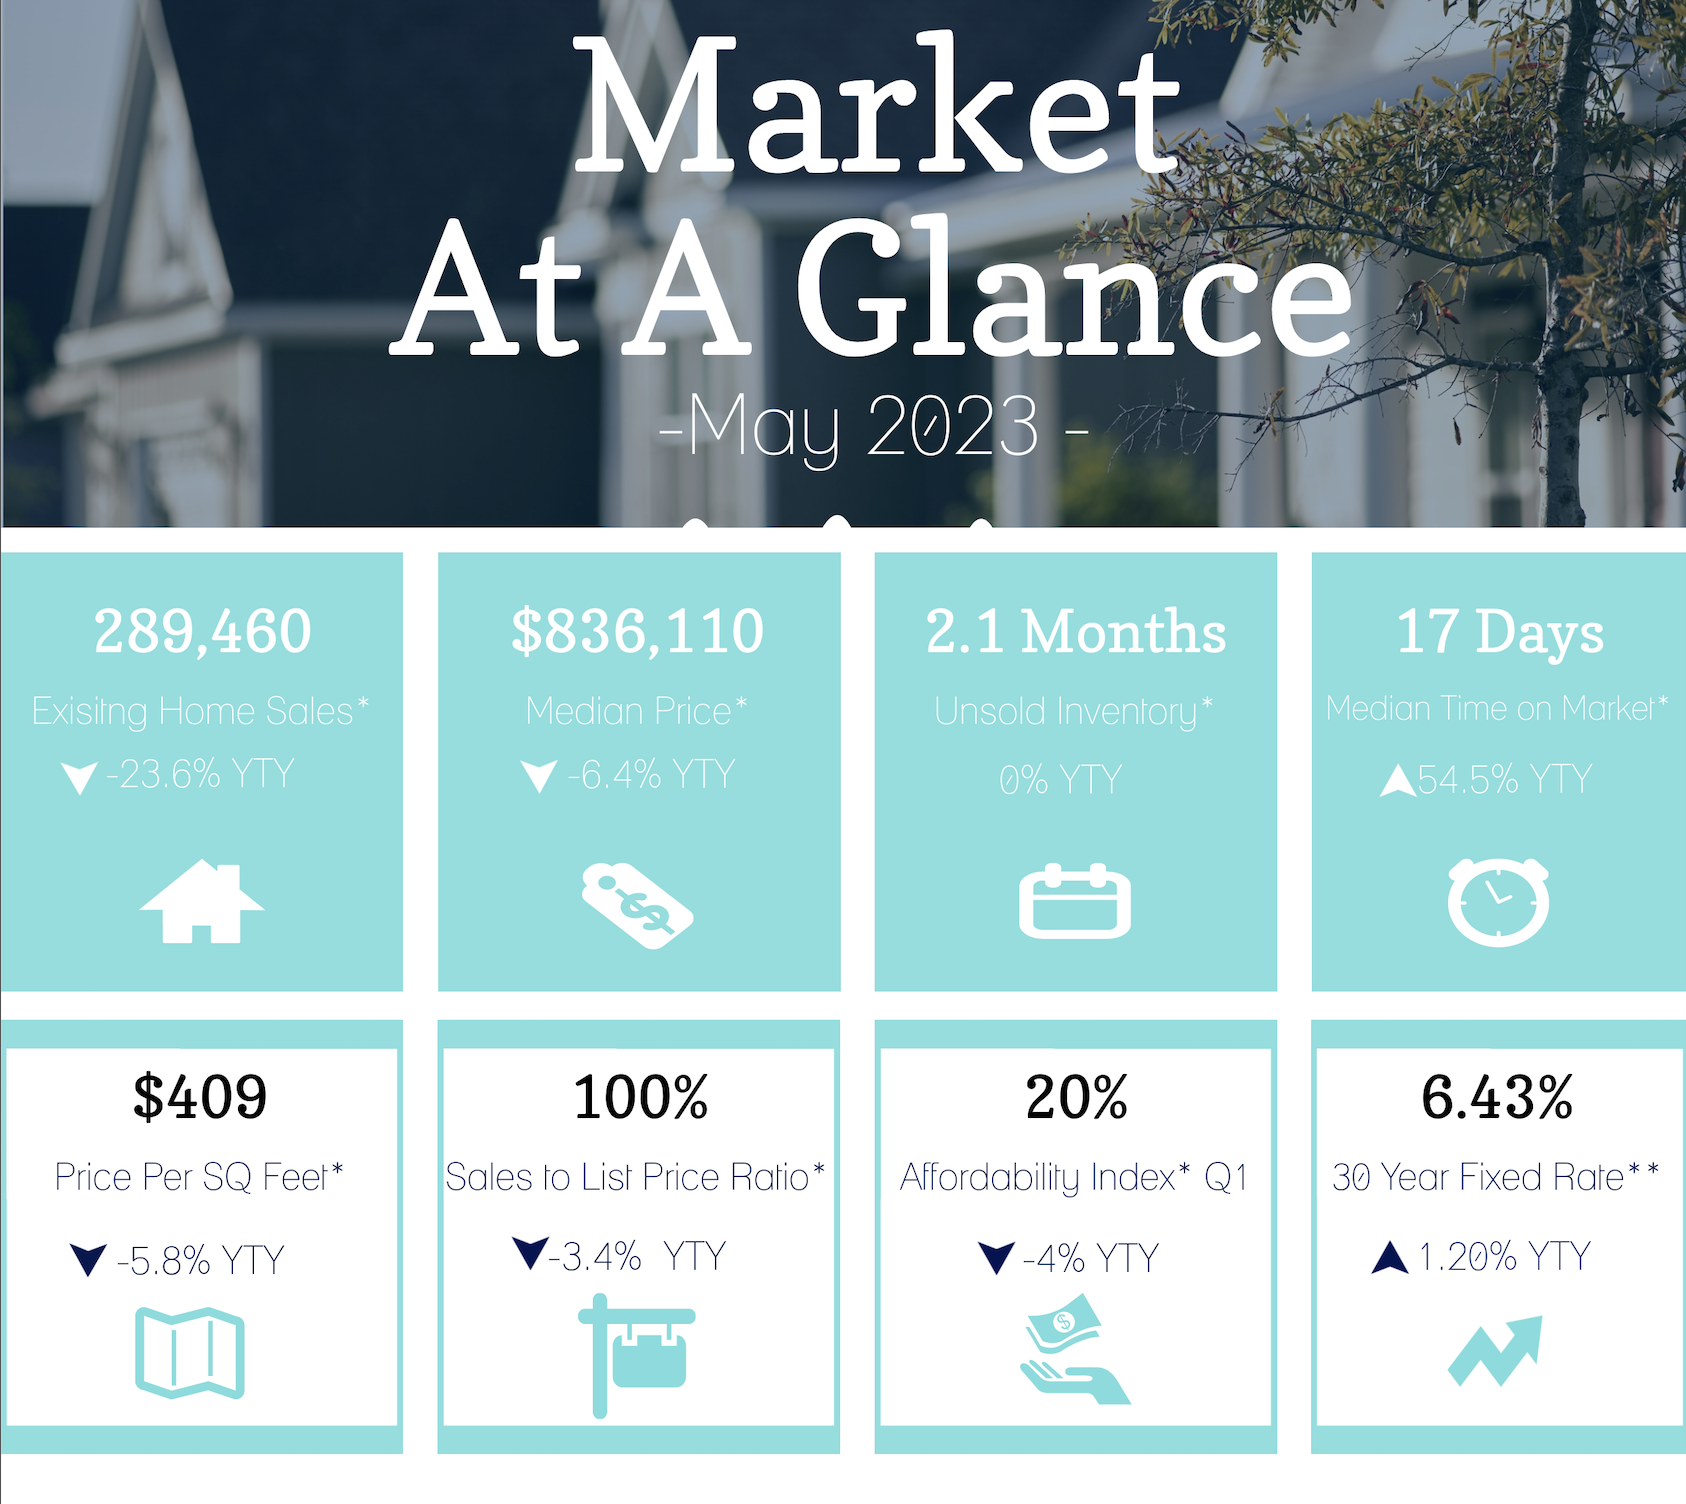 Housing Market At a Glance